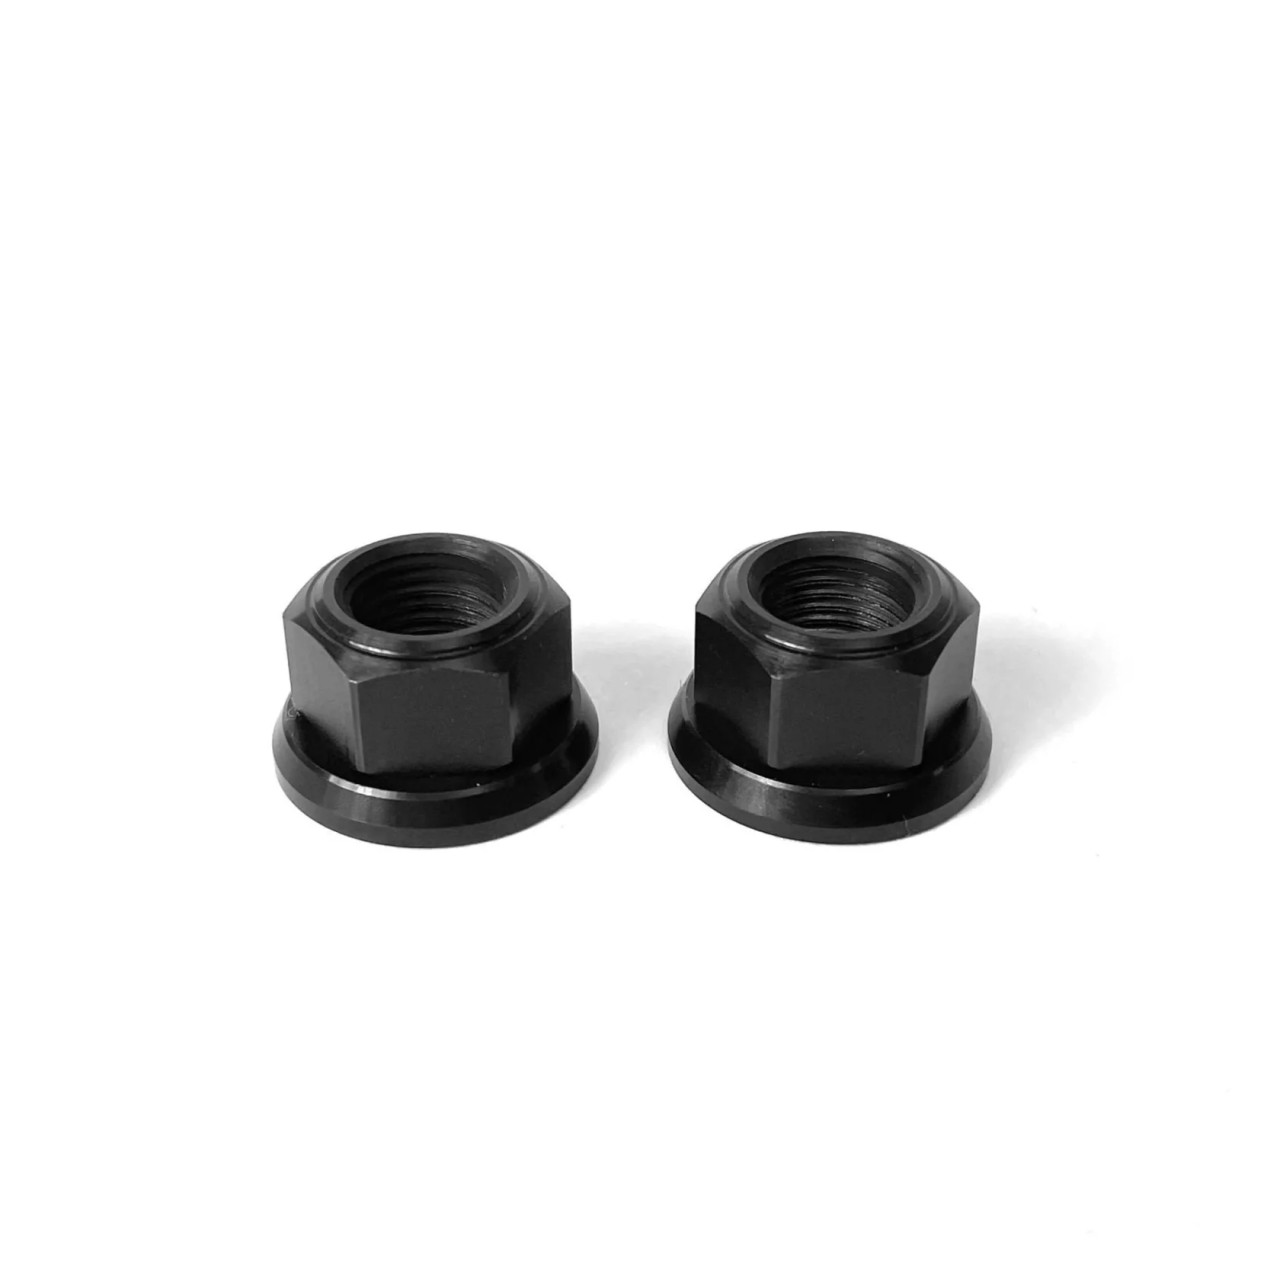 Runwell Elite Groove 12mm Hub Nuts For Campagnolo Rear Hubs 10 x 26 Threaded  x2